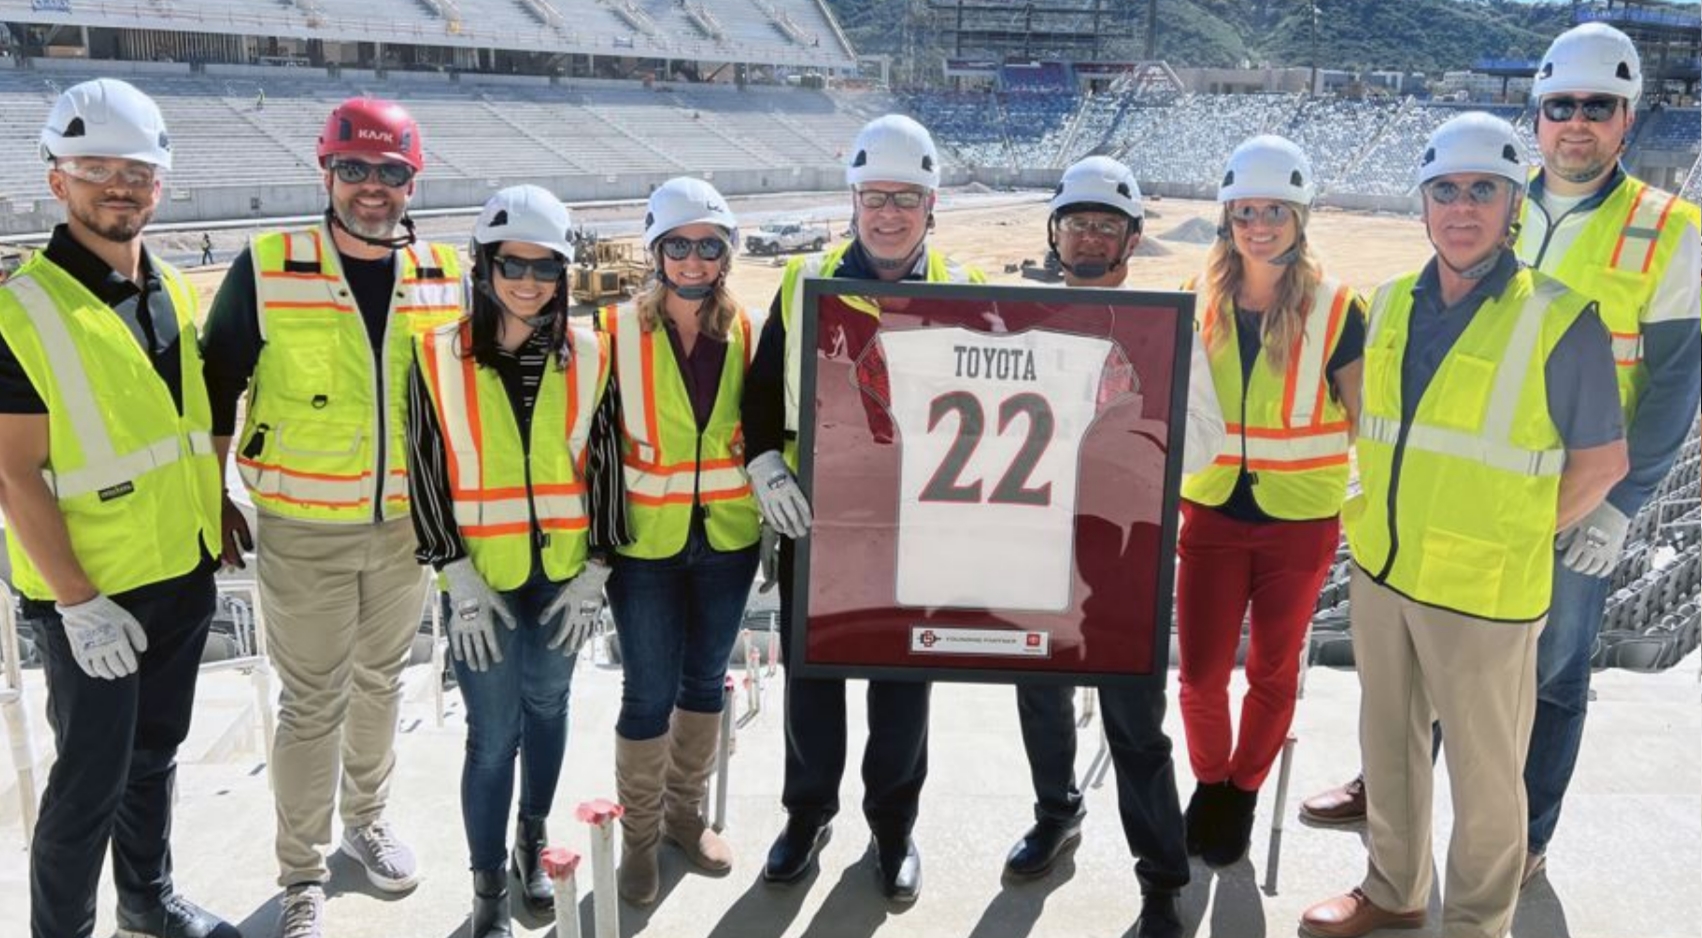 Members of San Diego County Toyota Dealers Association gathered at the construction site of the new Snapdragon Stadium in Mission Valley to announce their sponsorship.